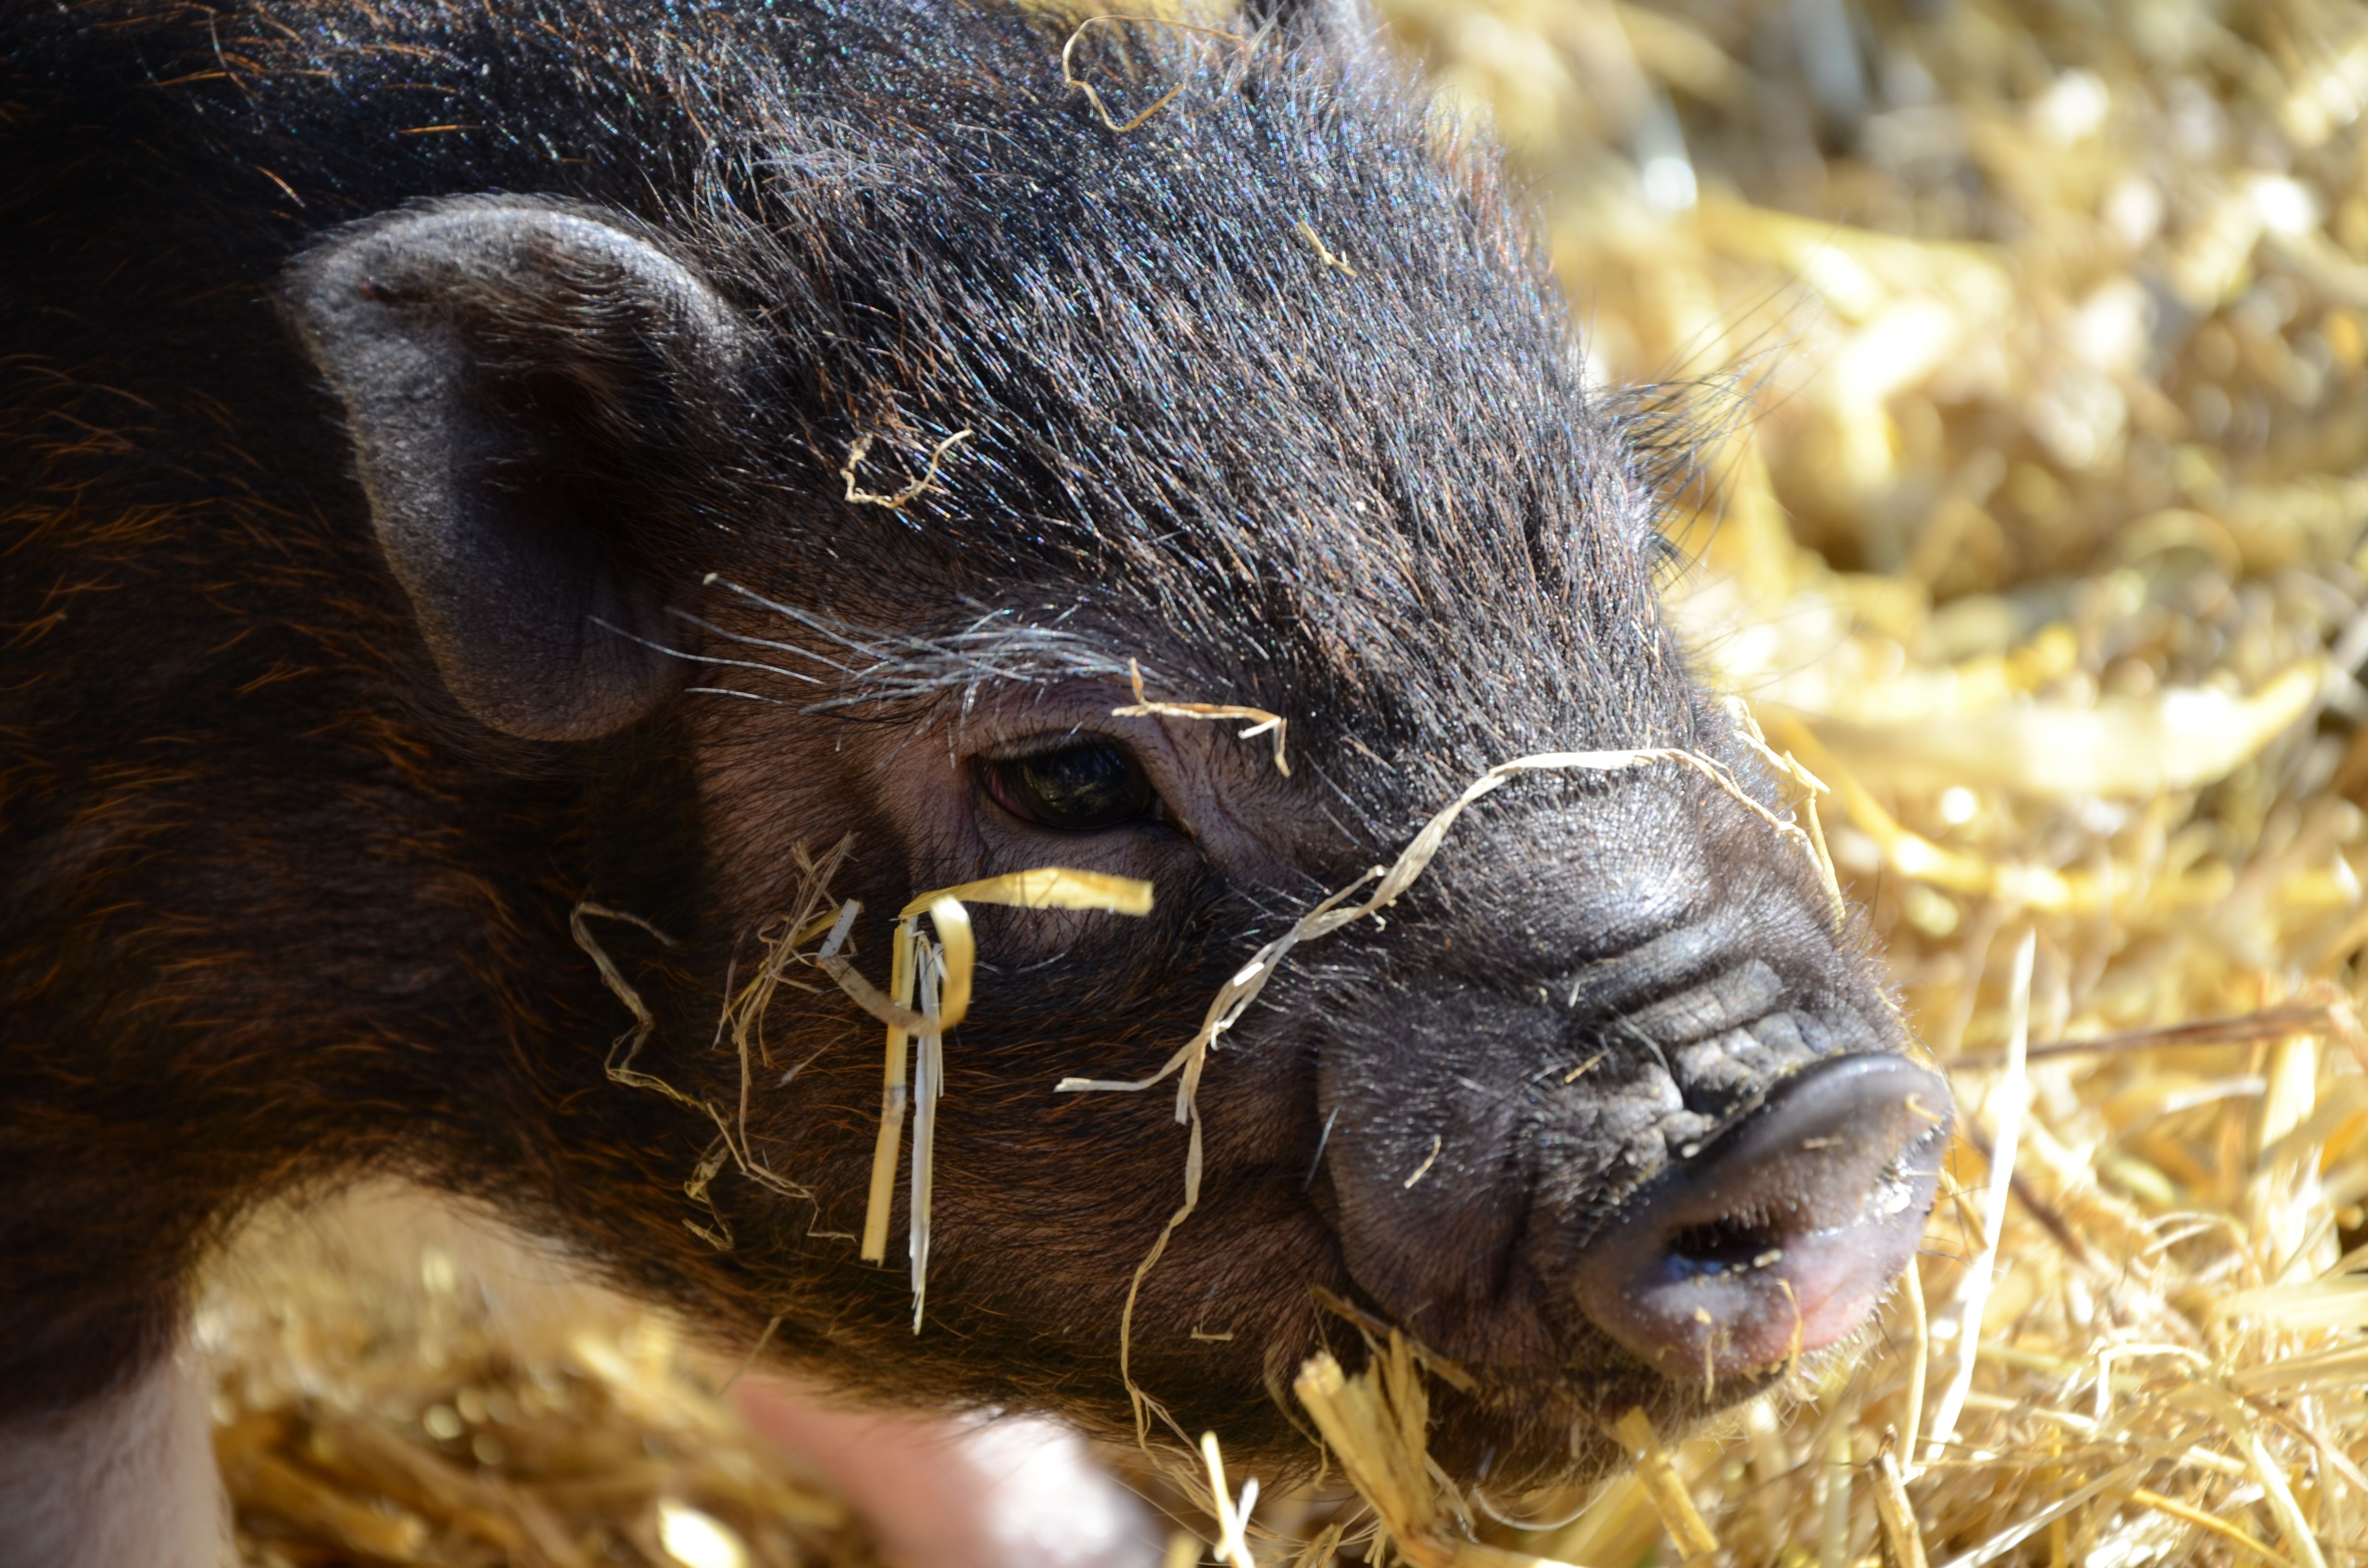 Close-Up Of Pot-Bellied Pig On Hay